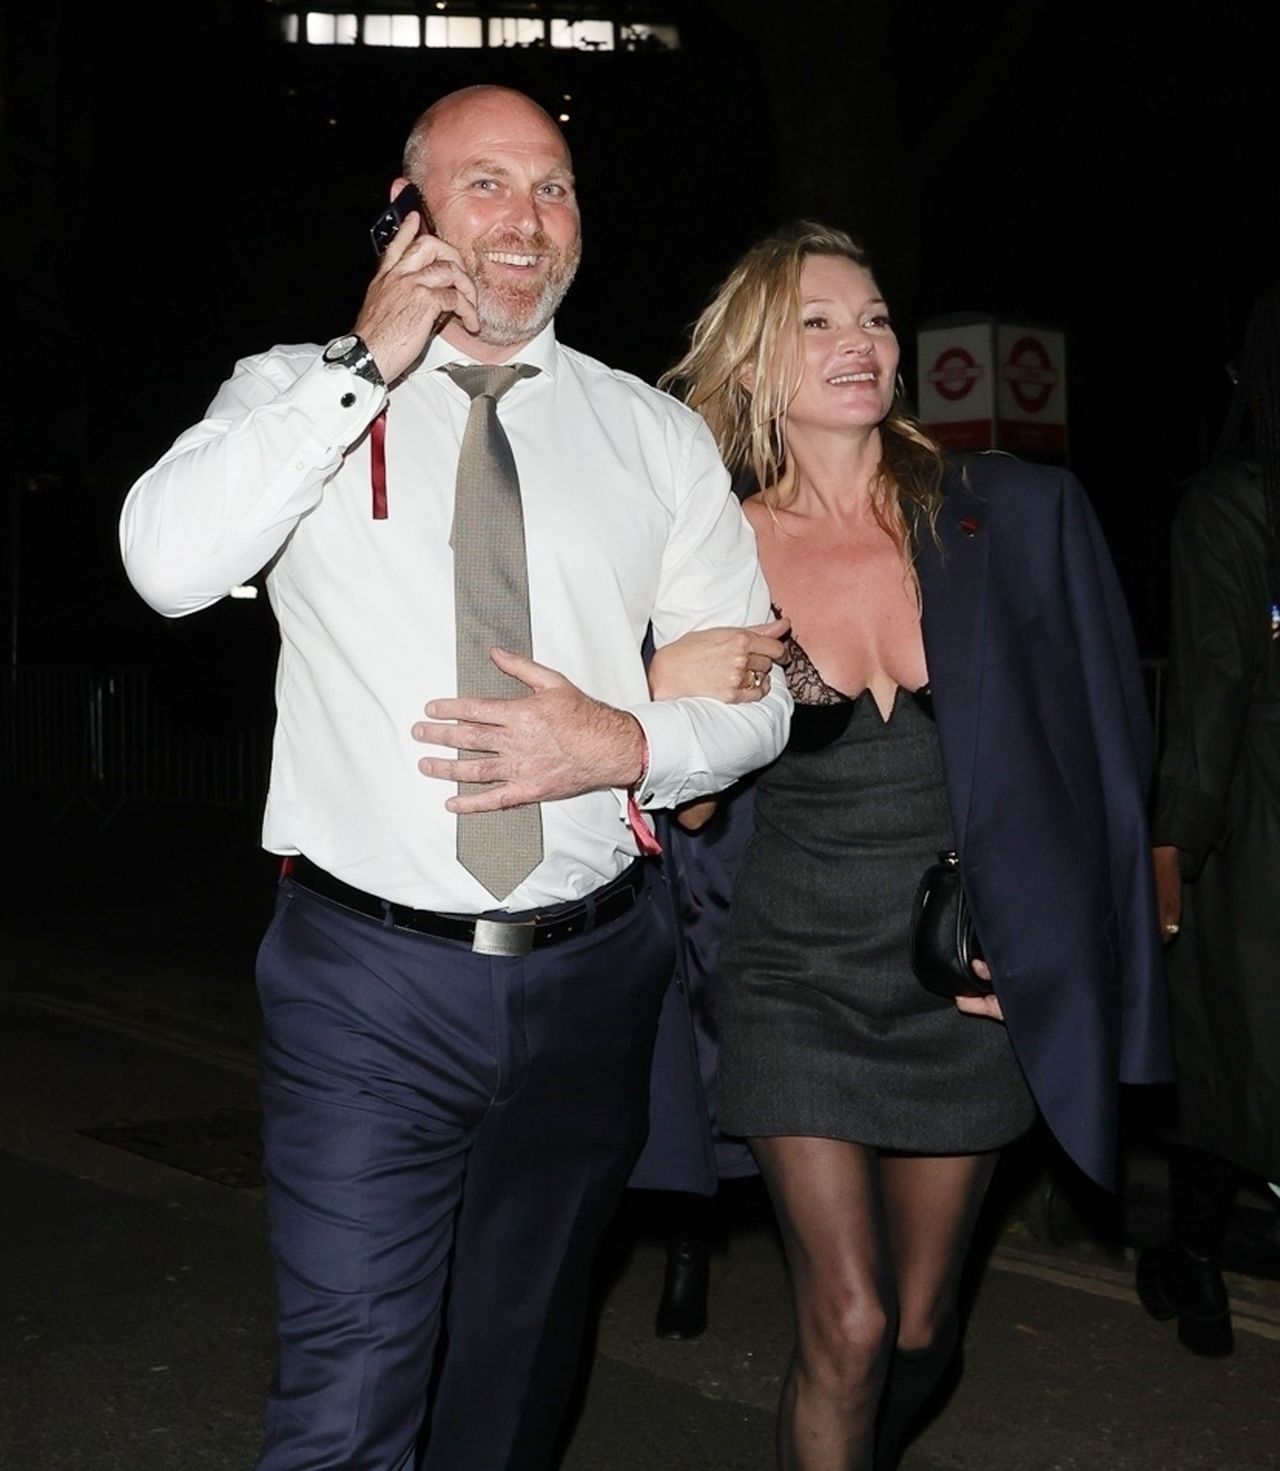 Kate Moss comes out of the Gucci after party laughing.